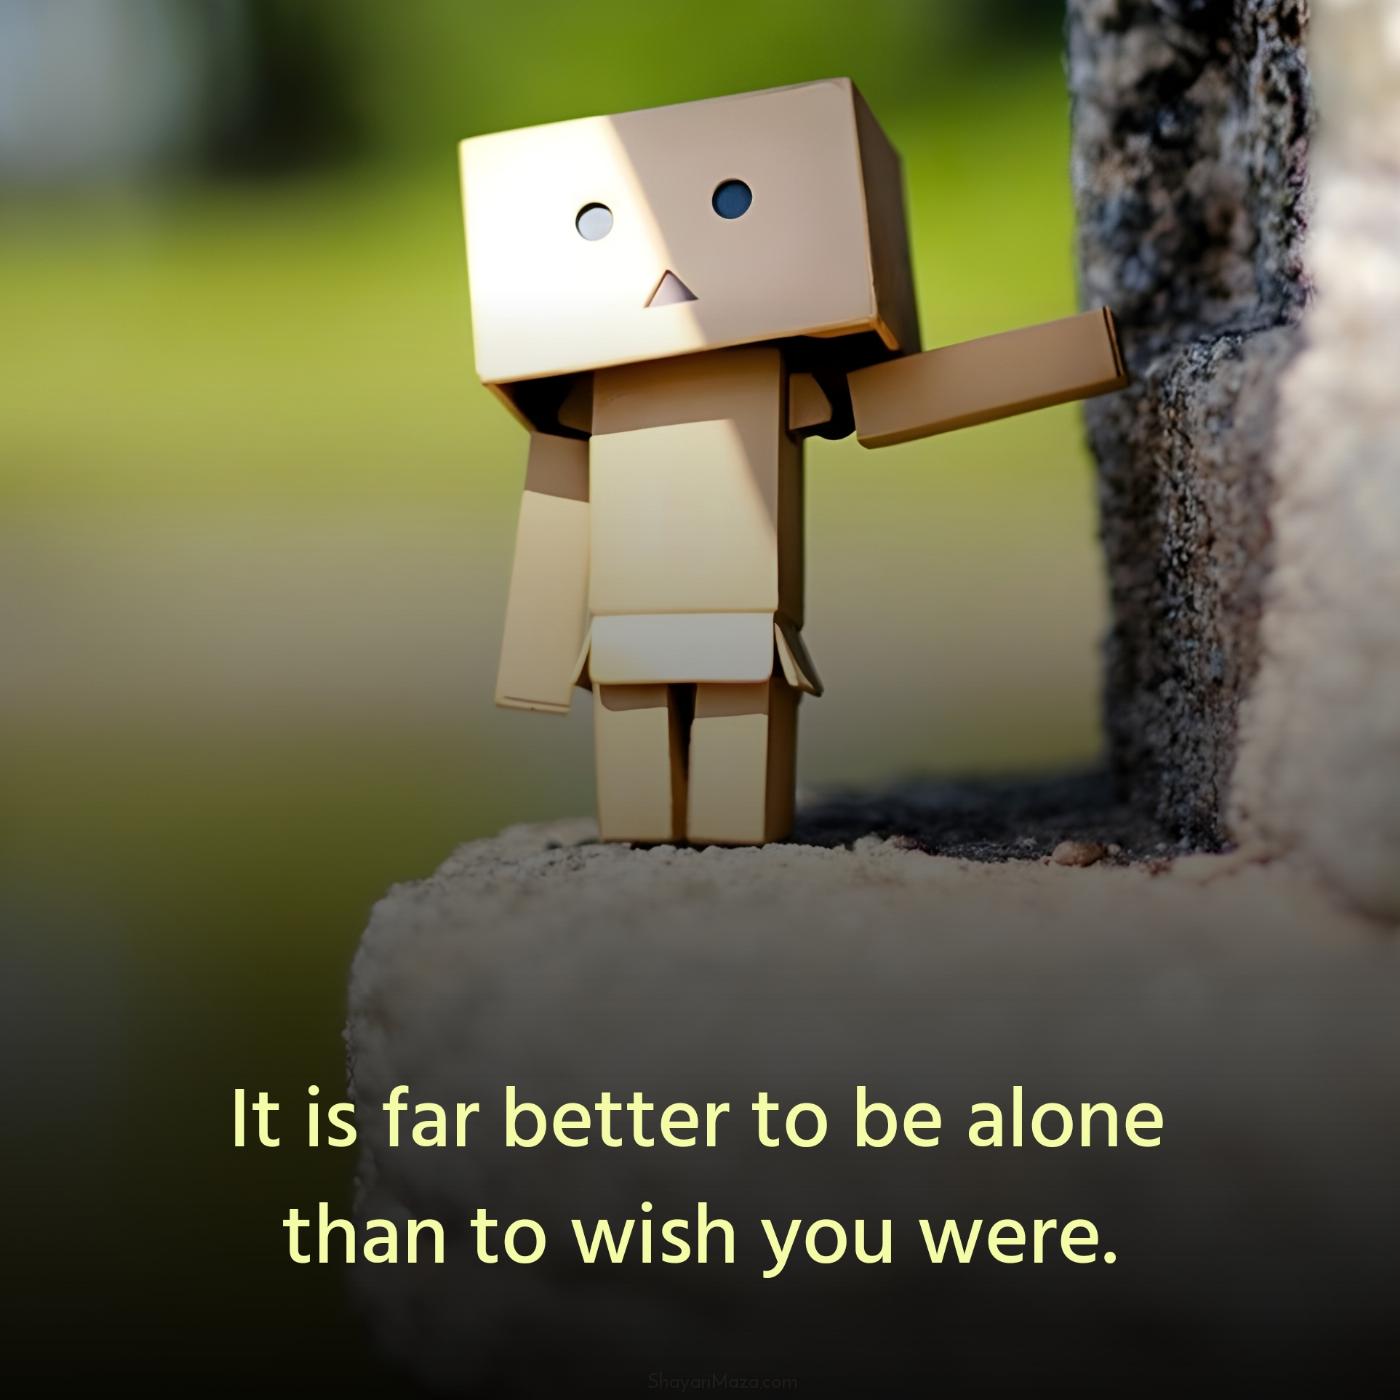 It is far better to be alone than to wish you were